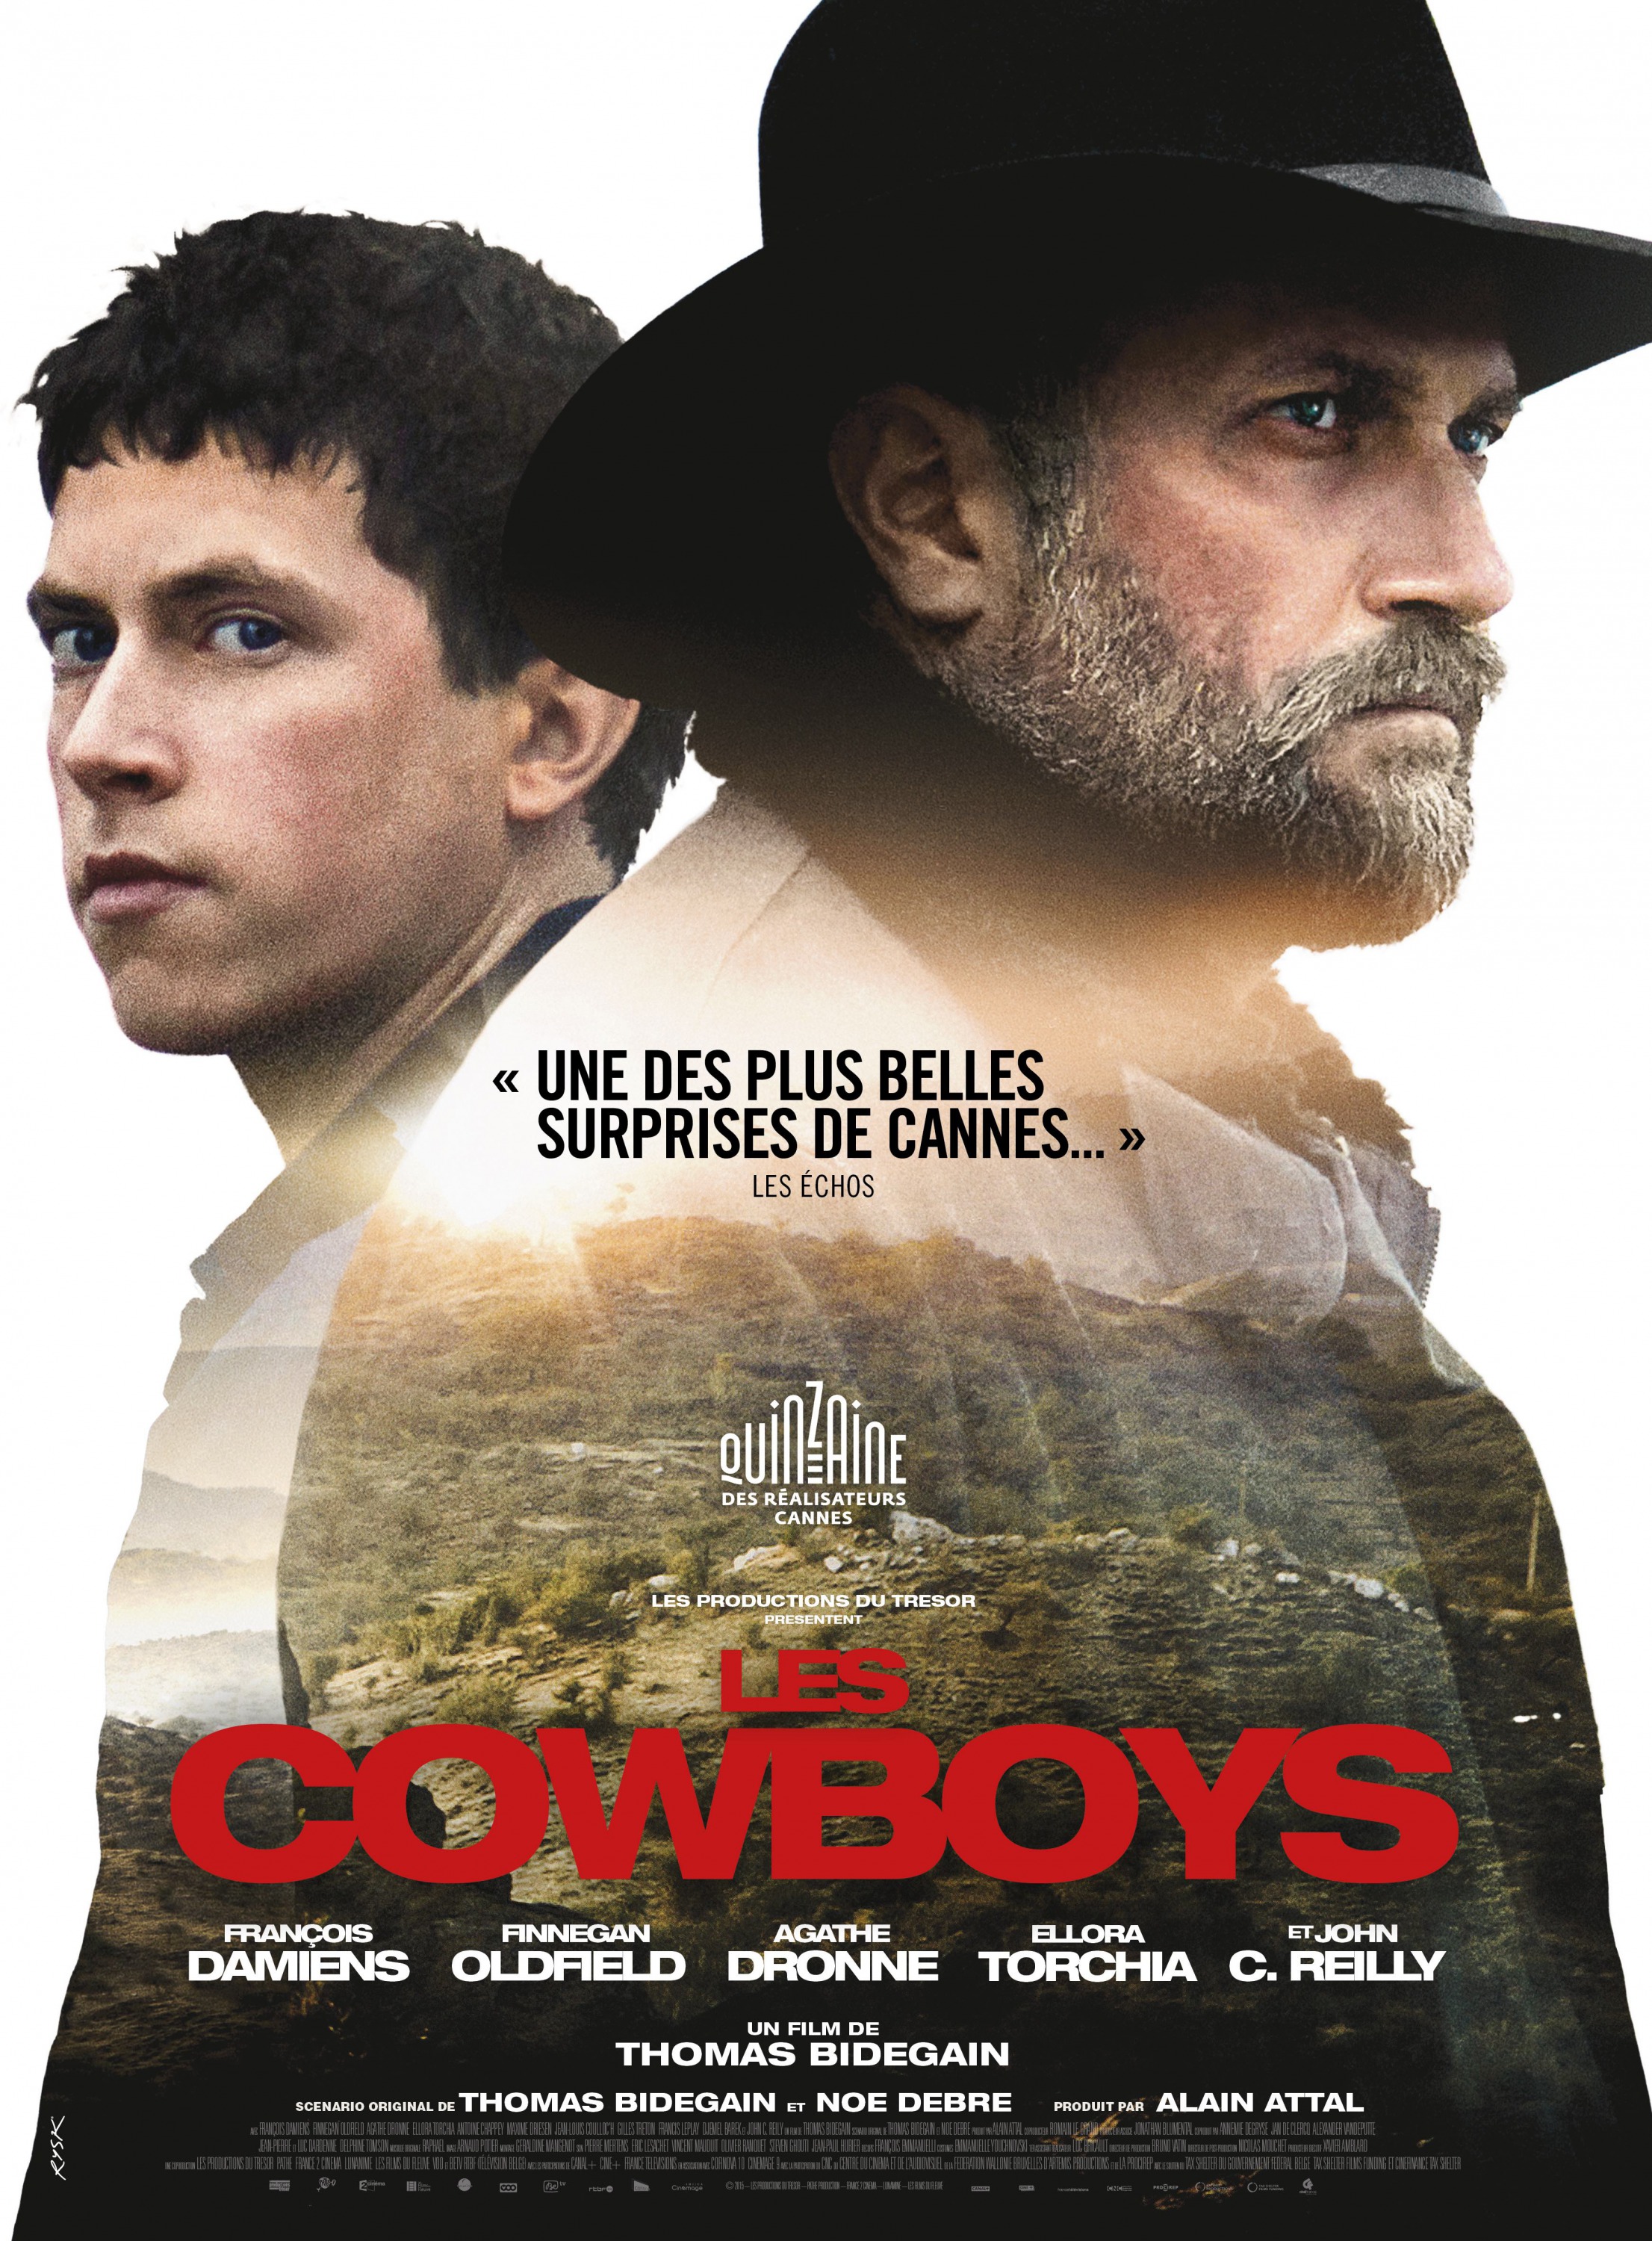 Mega Sized Movie Poster Image for Les cowboys (#1 of 2)